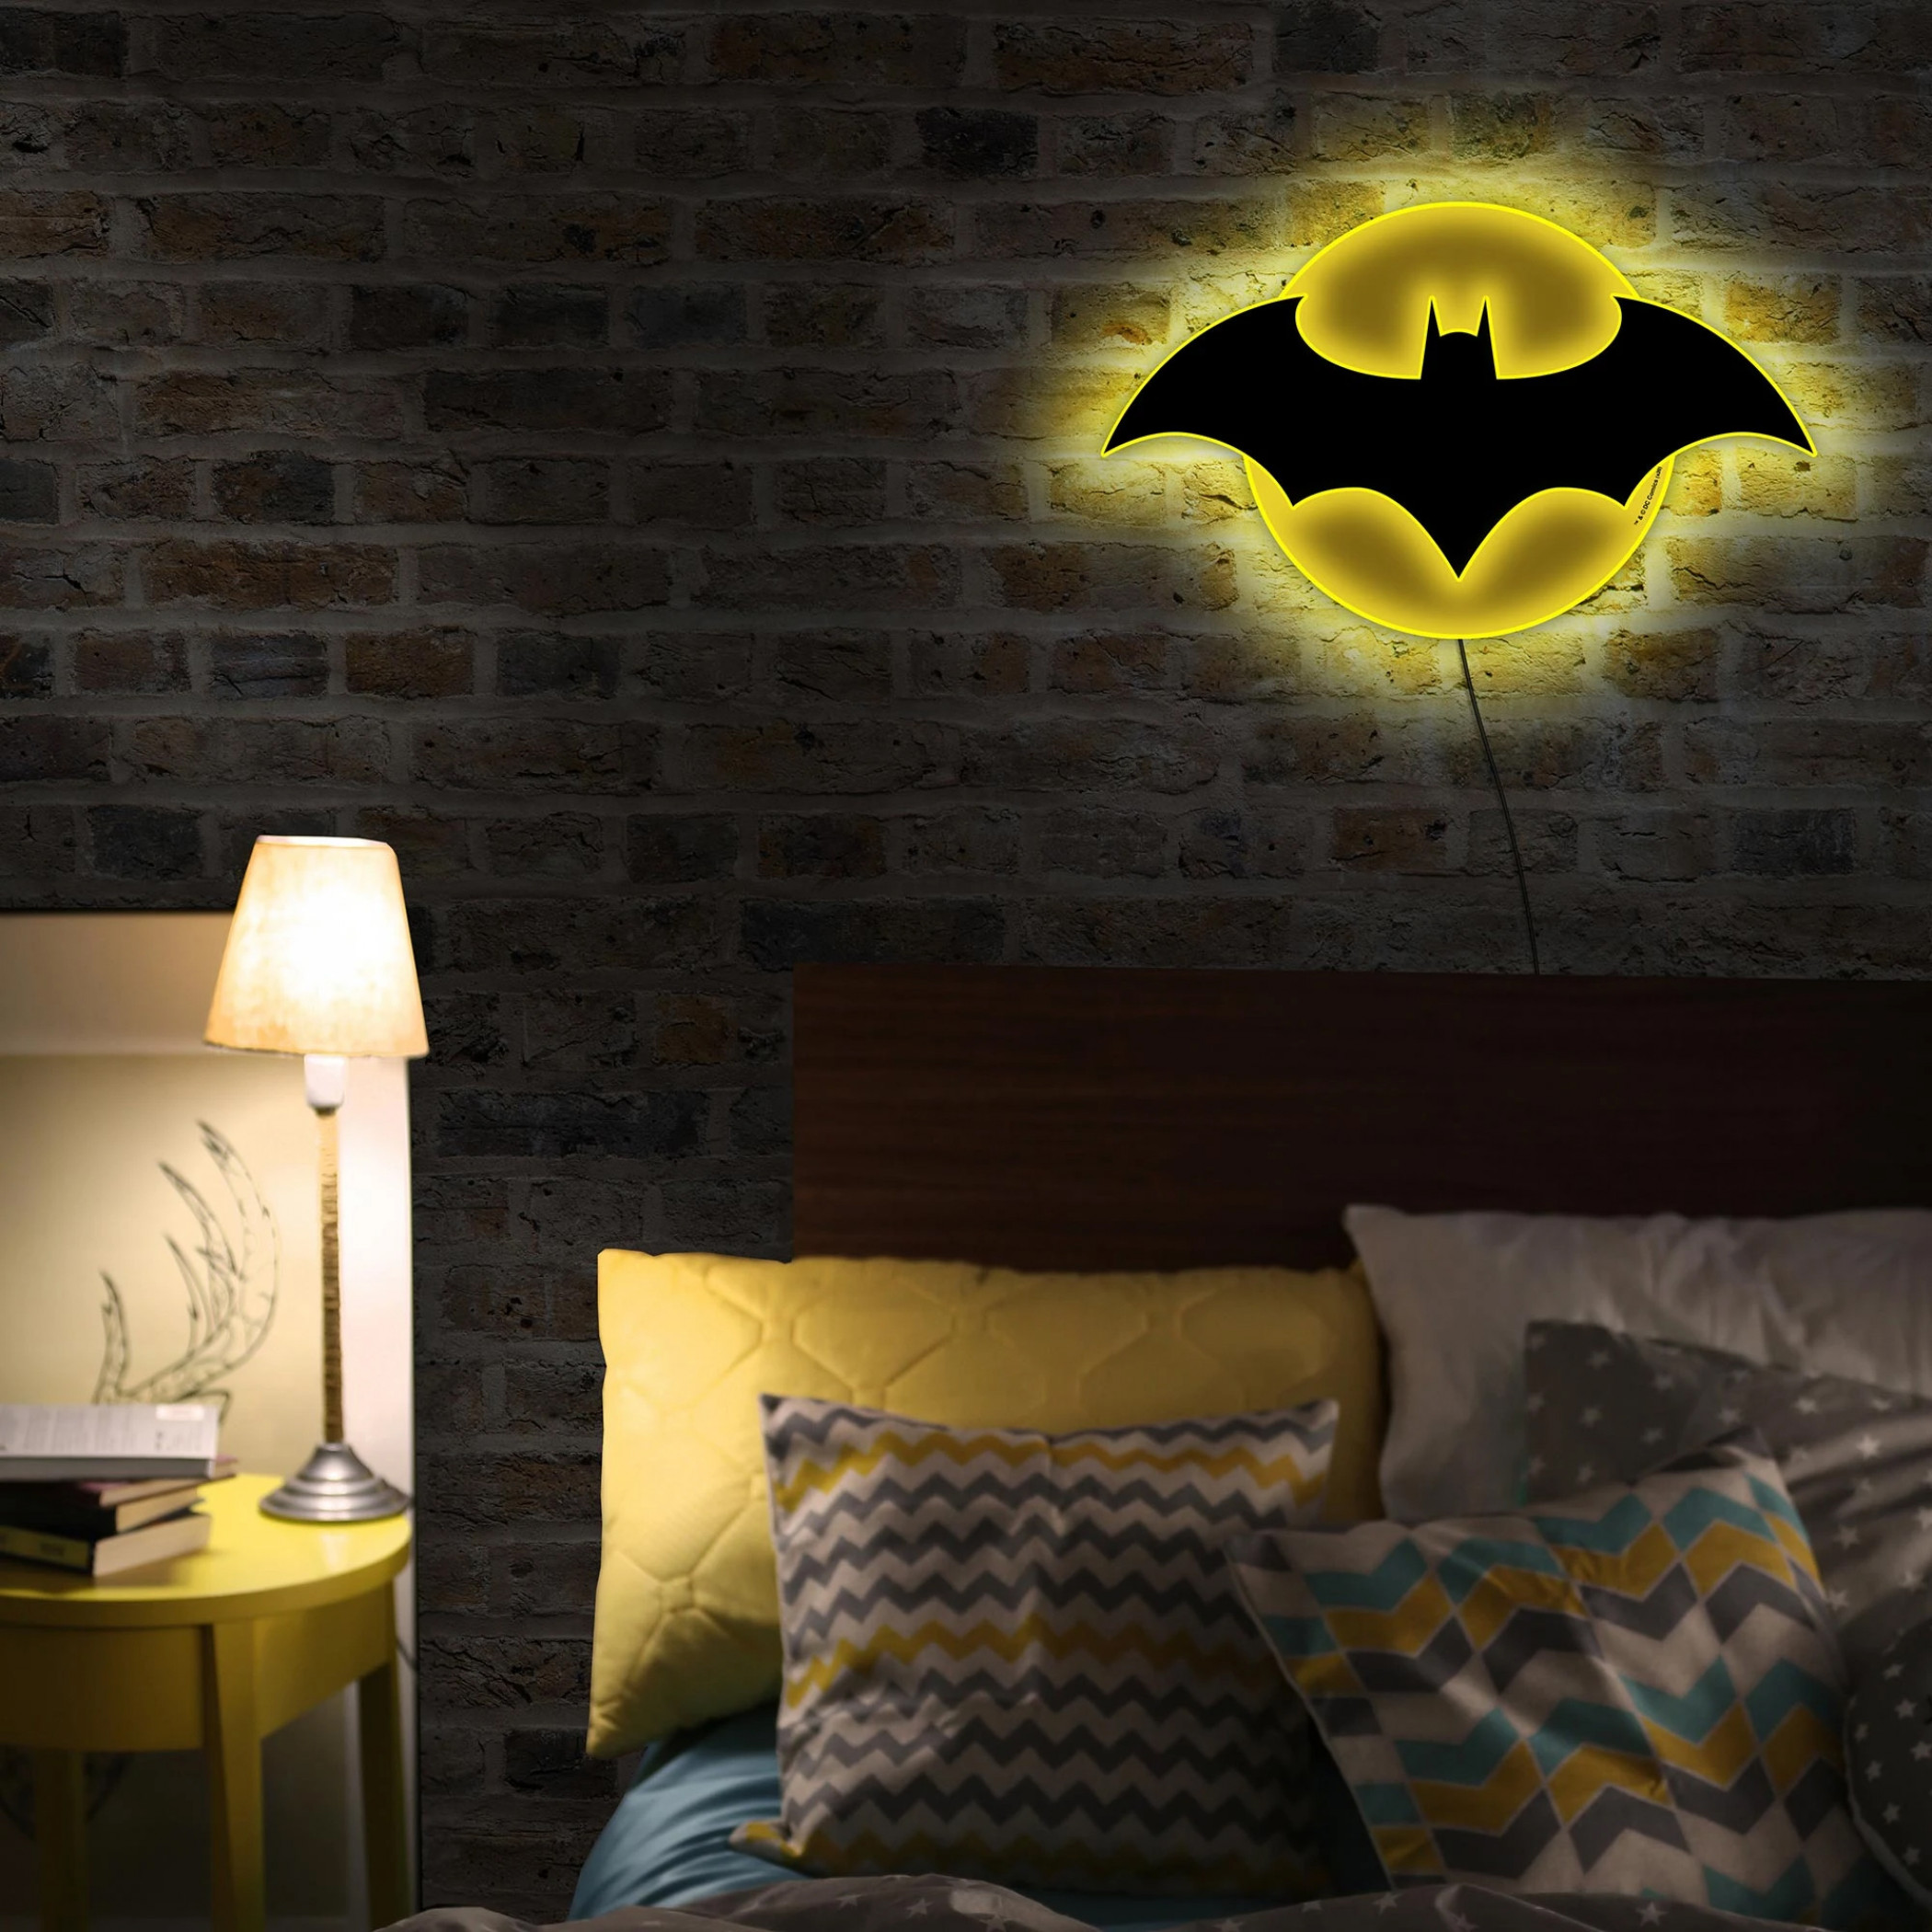 Batman Symbol Illuminated Table Lamp Or Mountable Wall Art With Dimmer